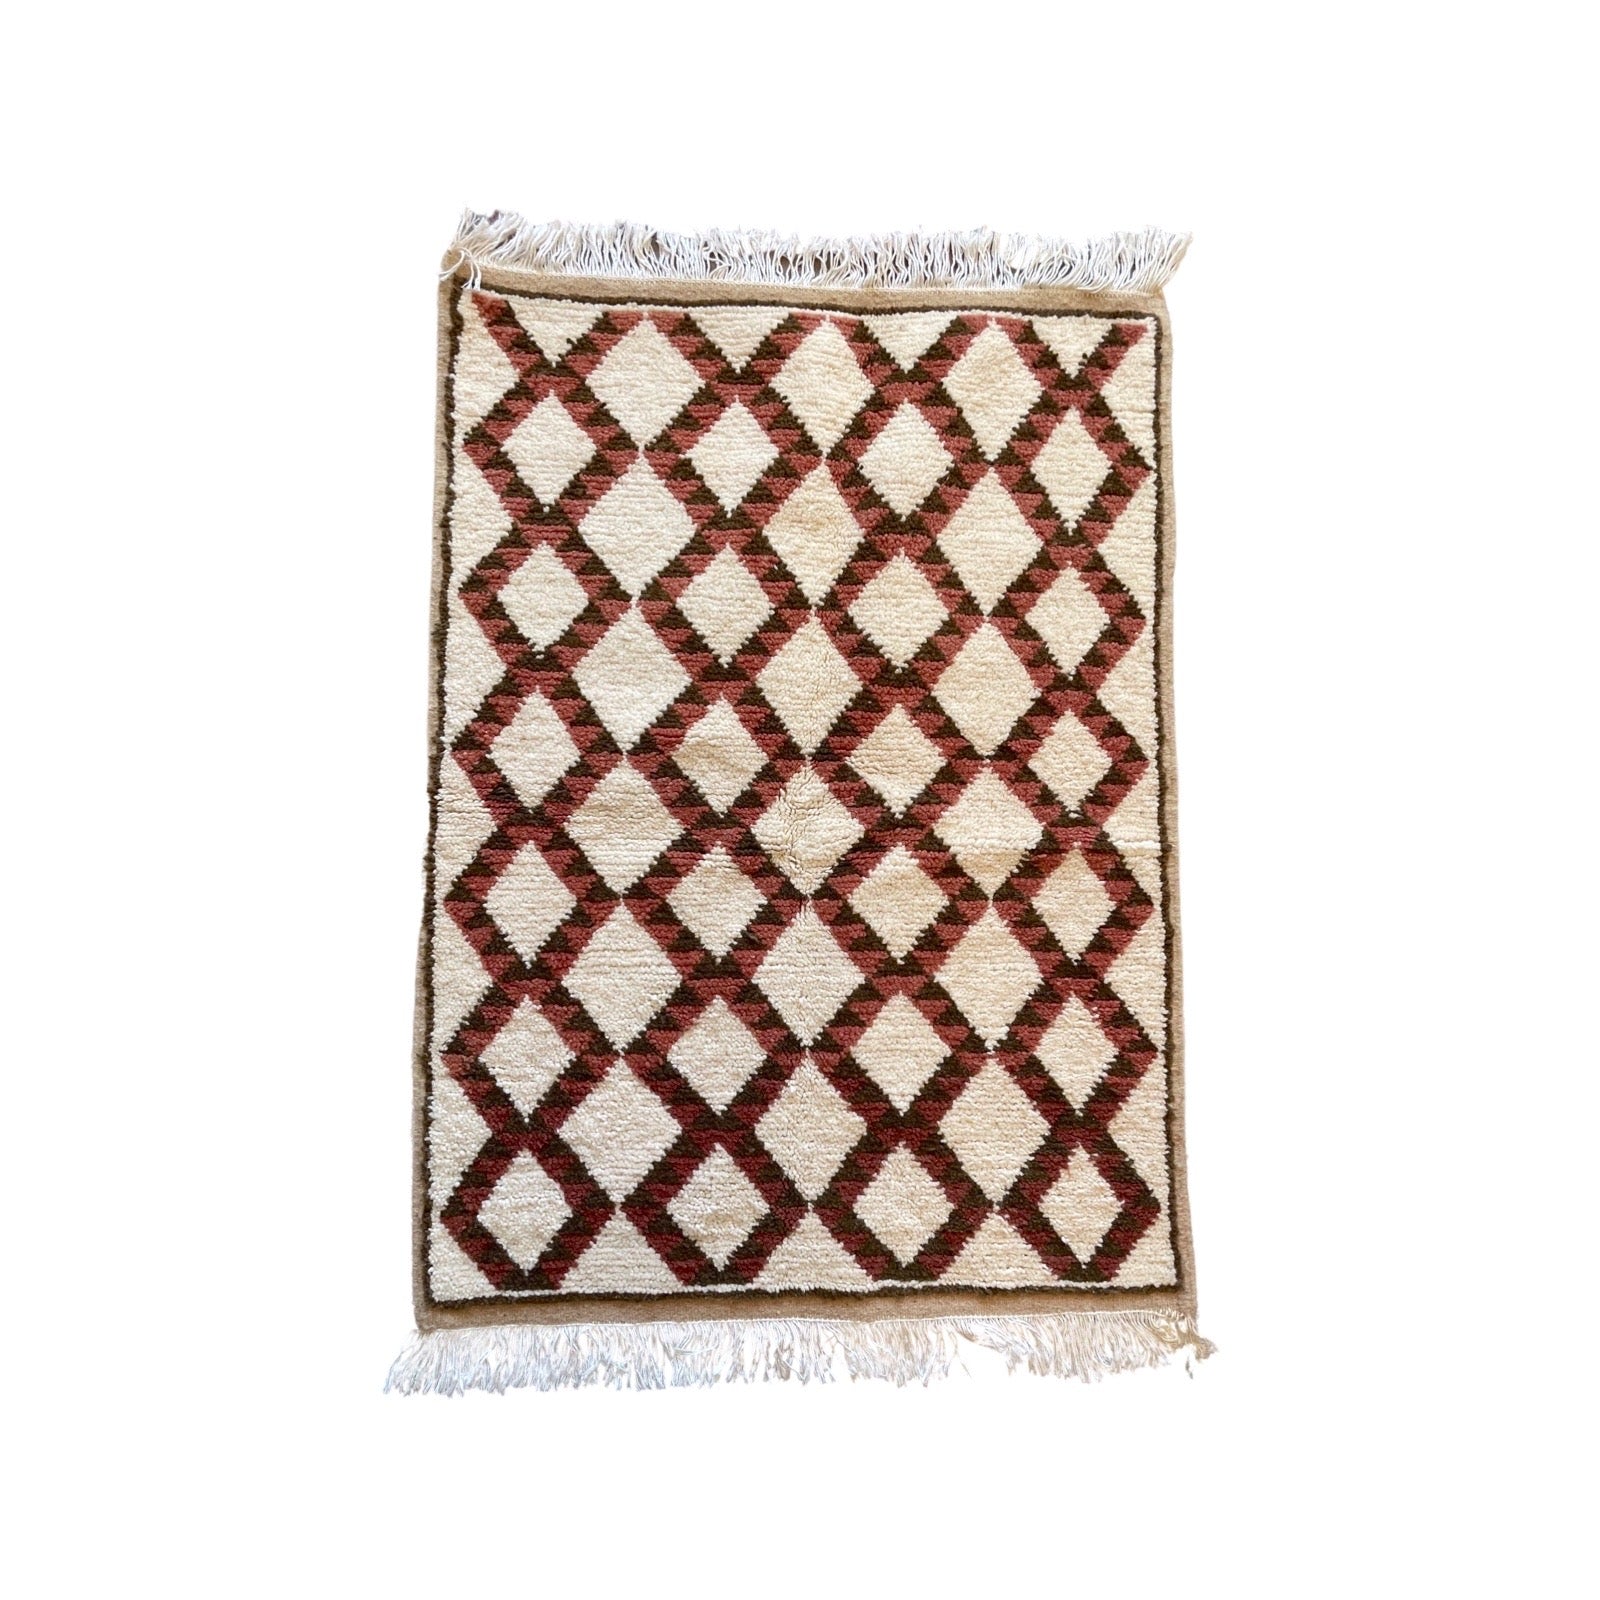 White Moroccan throw rug with dusty red and brown details - Kantara | Moroccan Rugs